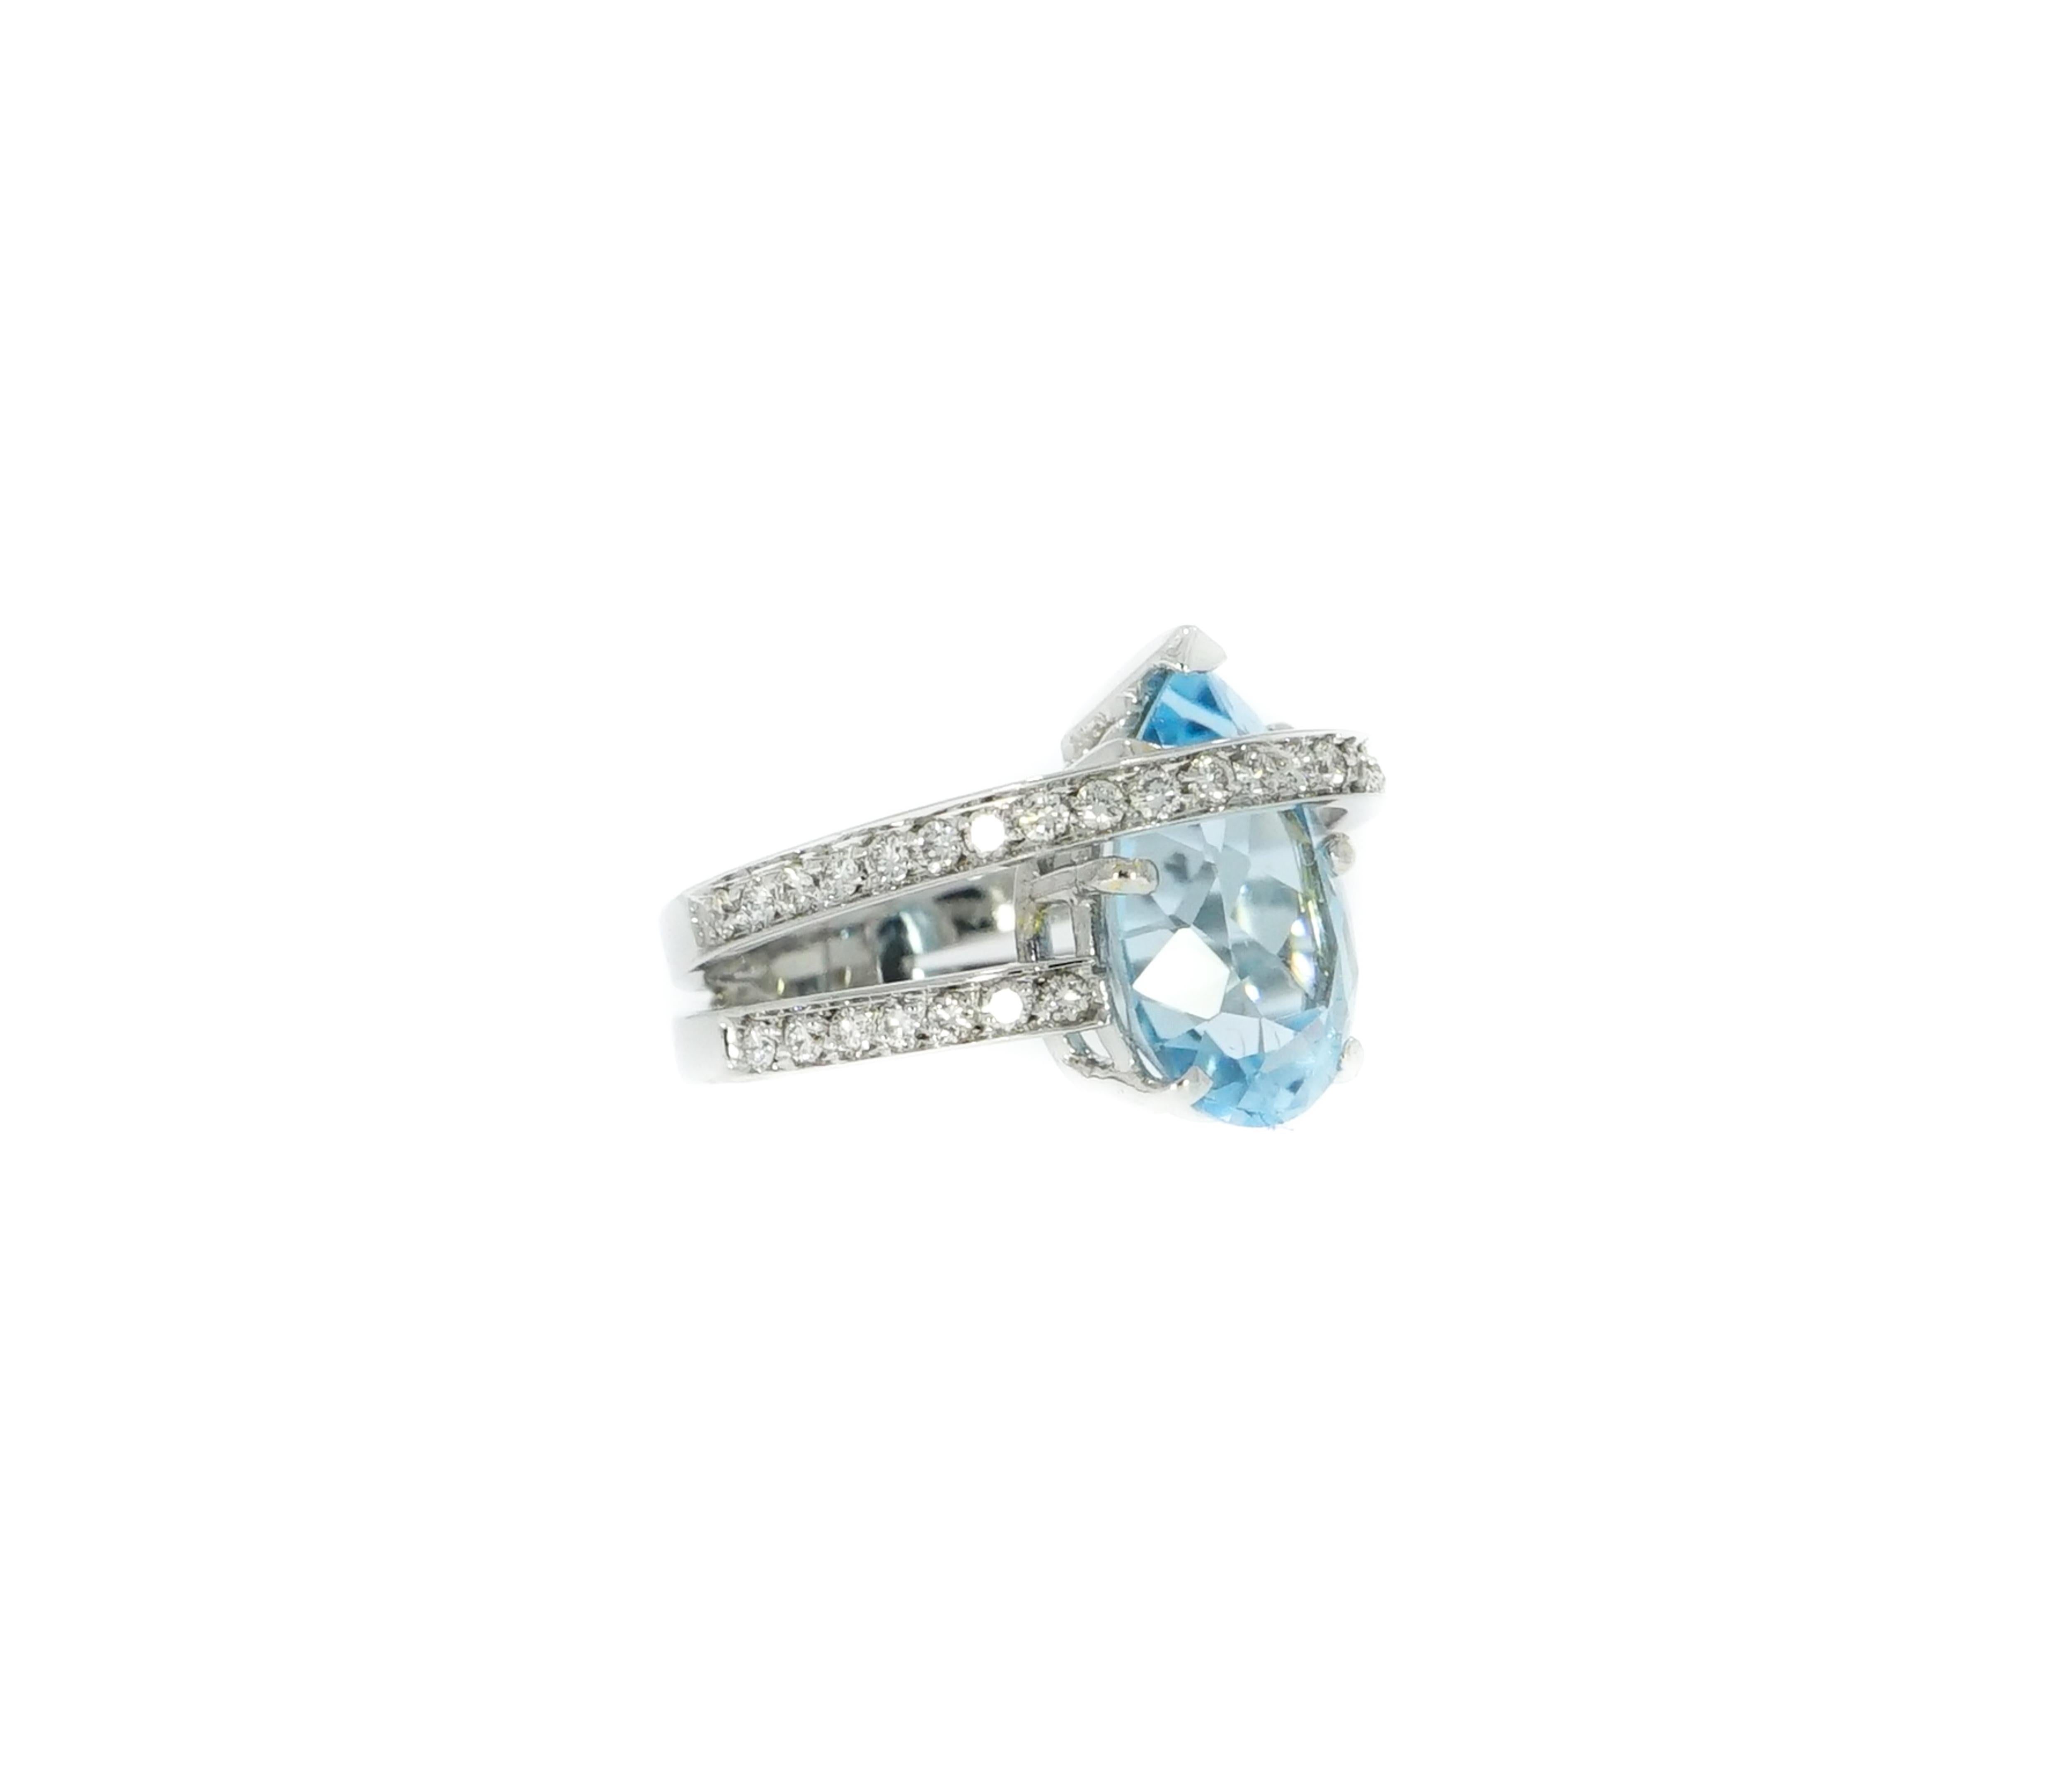 Get the sparkles you'd always been looking for...
This gorgeous Pear Shaped Blue Topaz and Diamonds Cocktail Ring is stunning!!!
Handcrafted in 18k white gold featuring a beautiful pear shaped Blue Topaz center and decorated with a band of 0.54